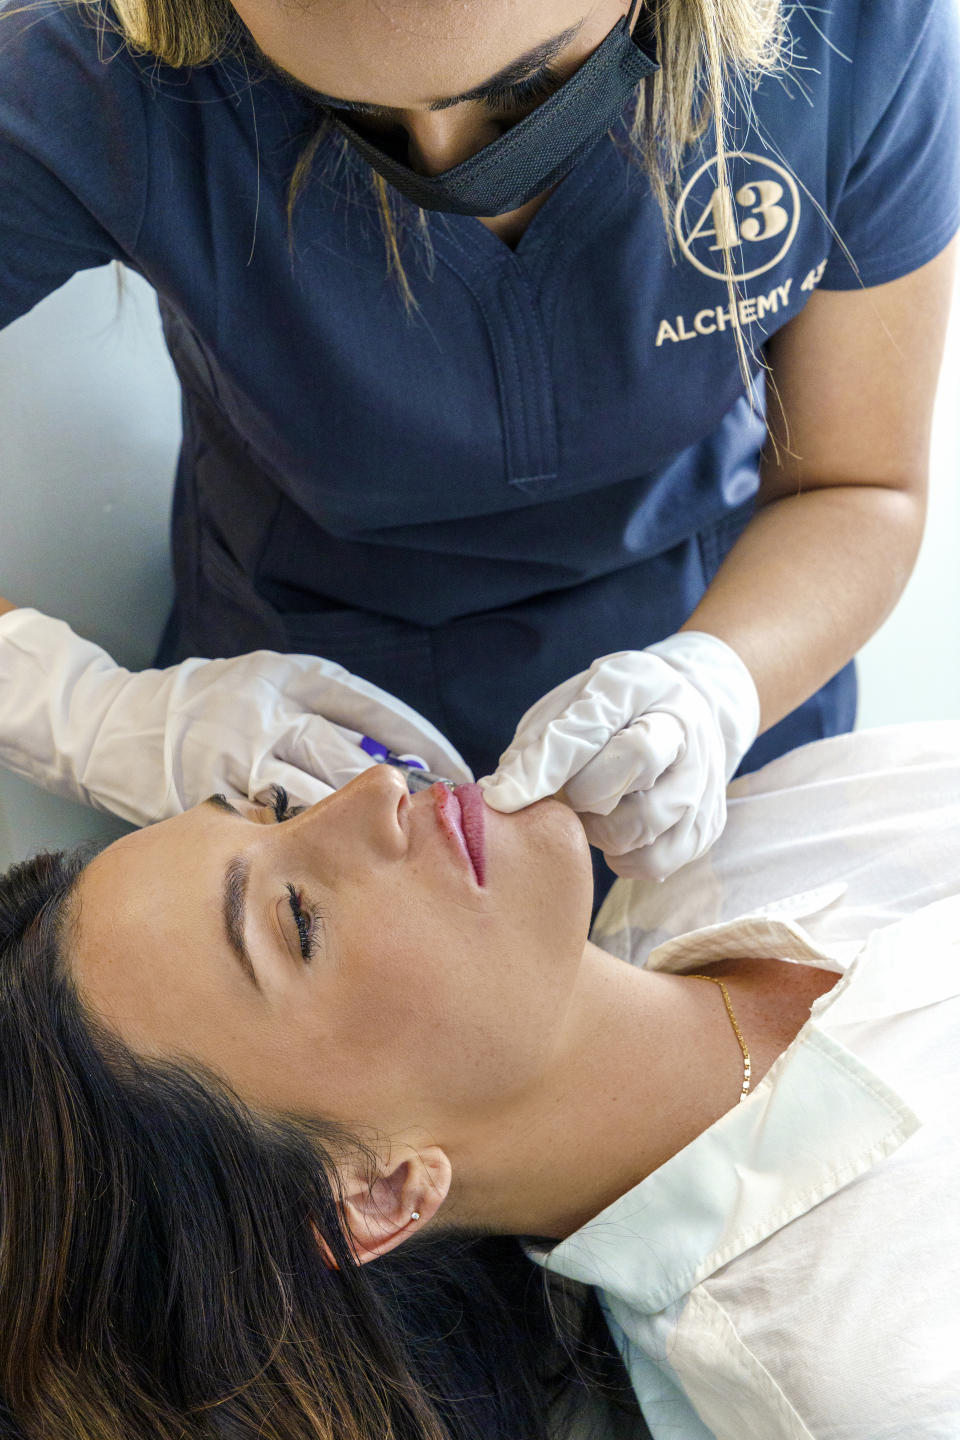 Alchemy 43 specializes in injectables, such as Botox and fillers. - Credit: Courtesy Photo